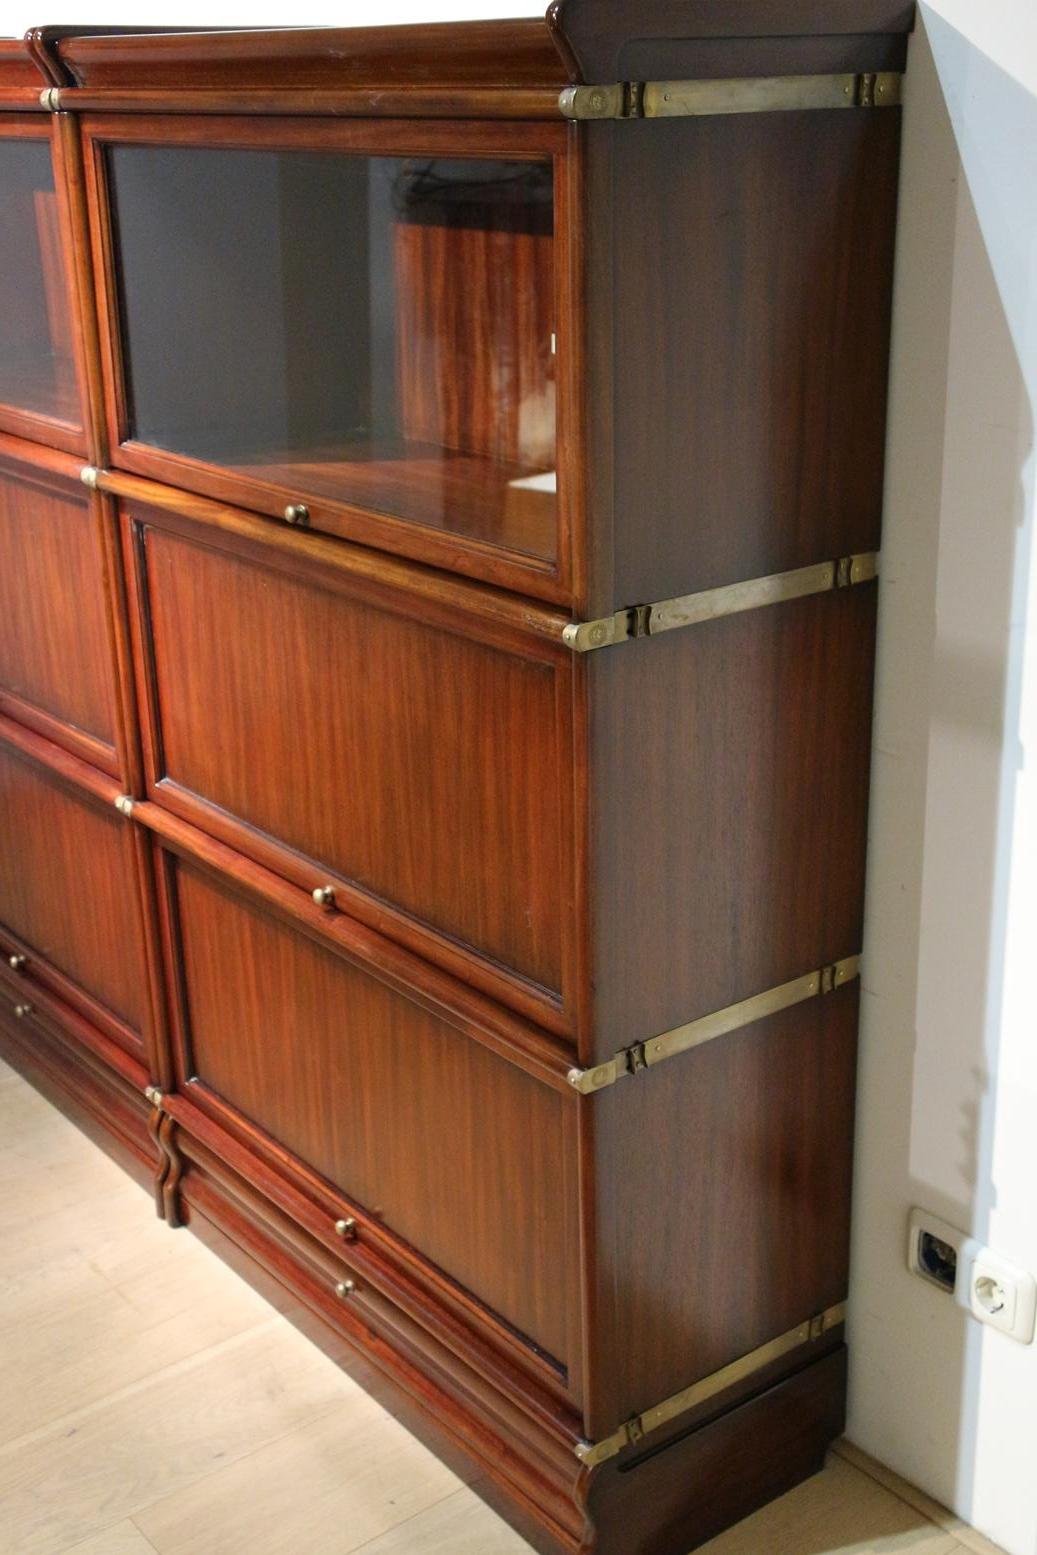 Beautiful new mahogany globe Wernicke bookcase. They are all large parts in which files can fit. And thanks to the closed panels, it is ideally suited for storing files. But also large books go in. Cabinet consists of 6 stackable parts, 2 plints